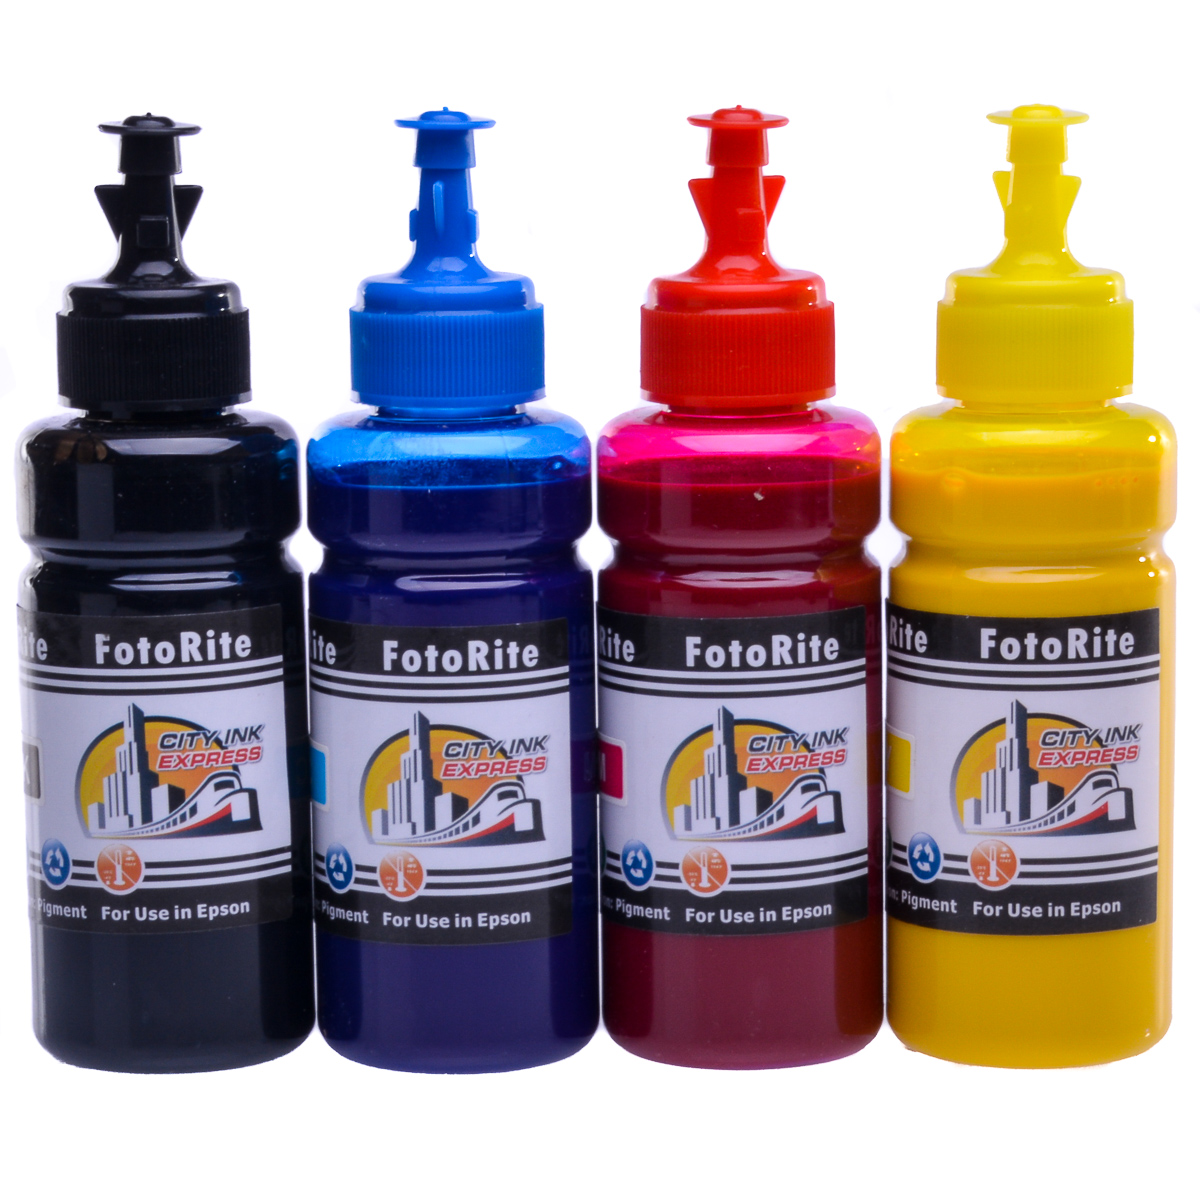 Cheap Multipack pigment ink refill replaces Epson WF-2810DWF